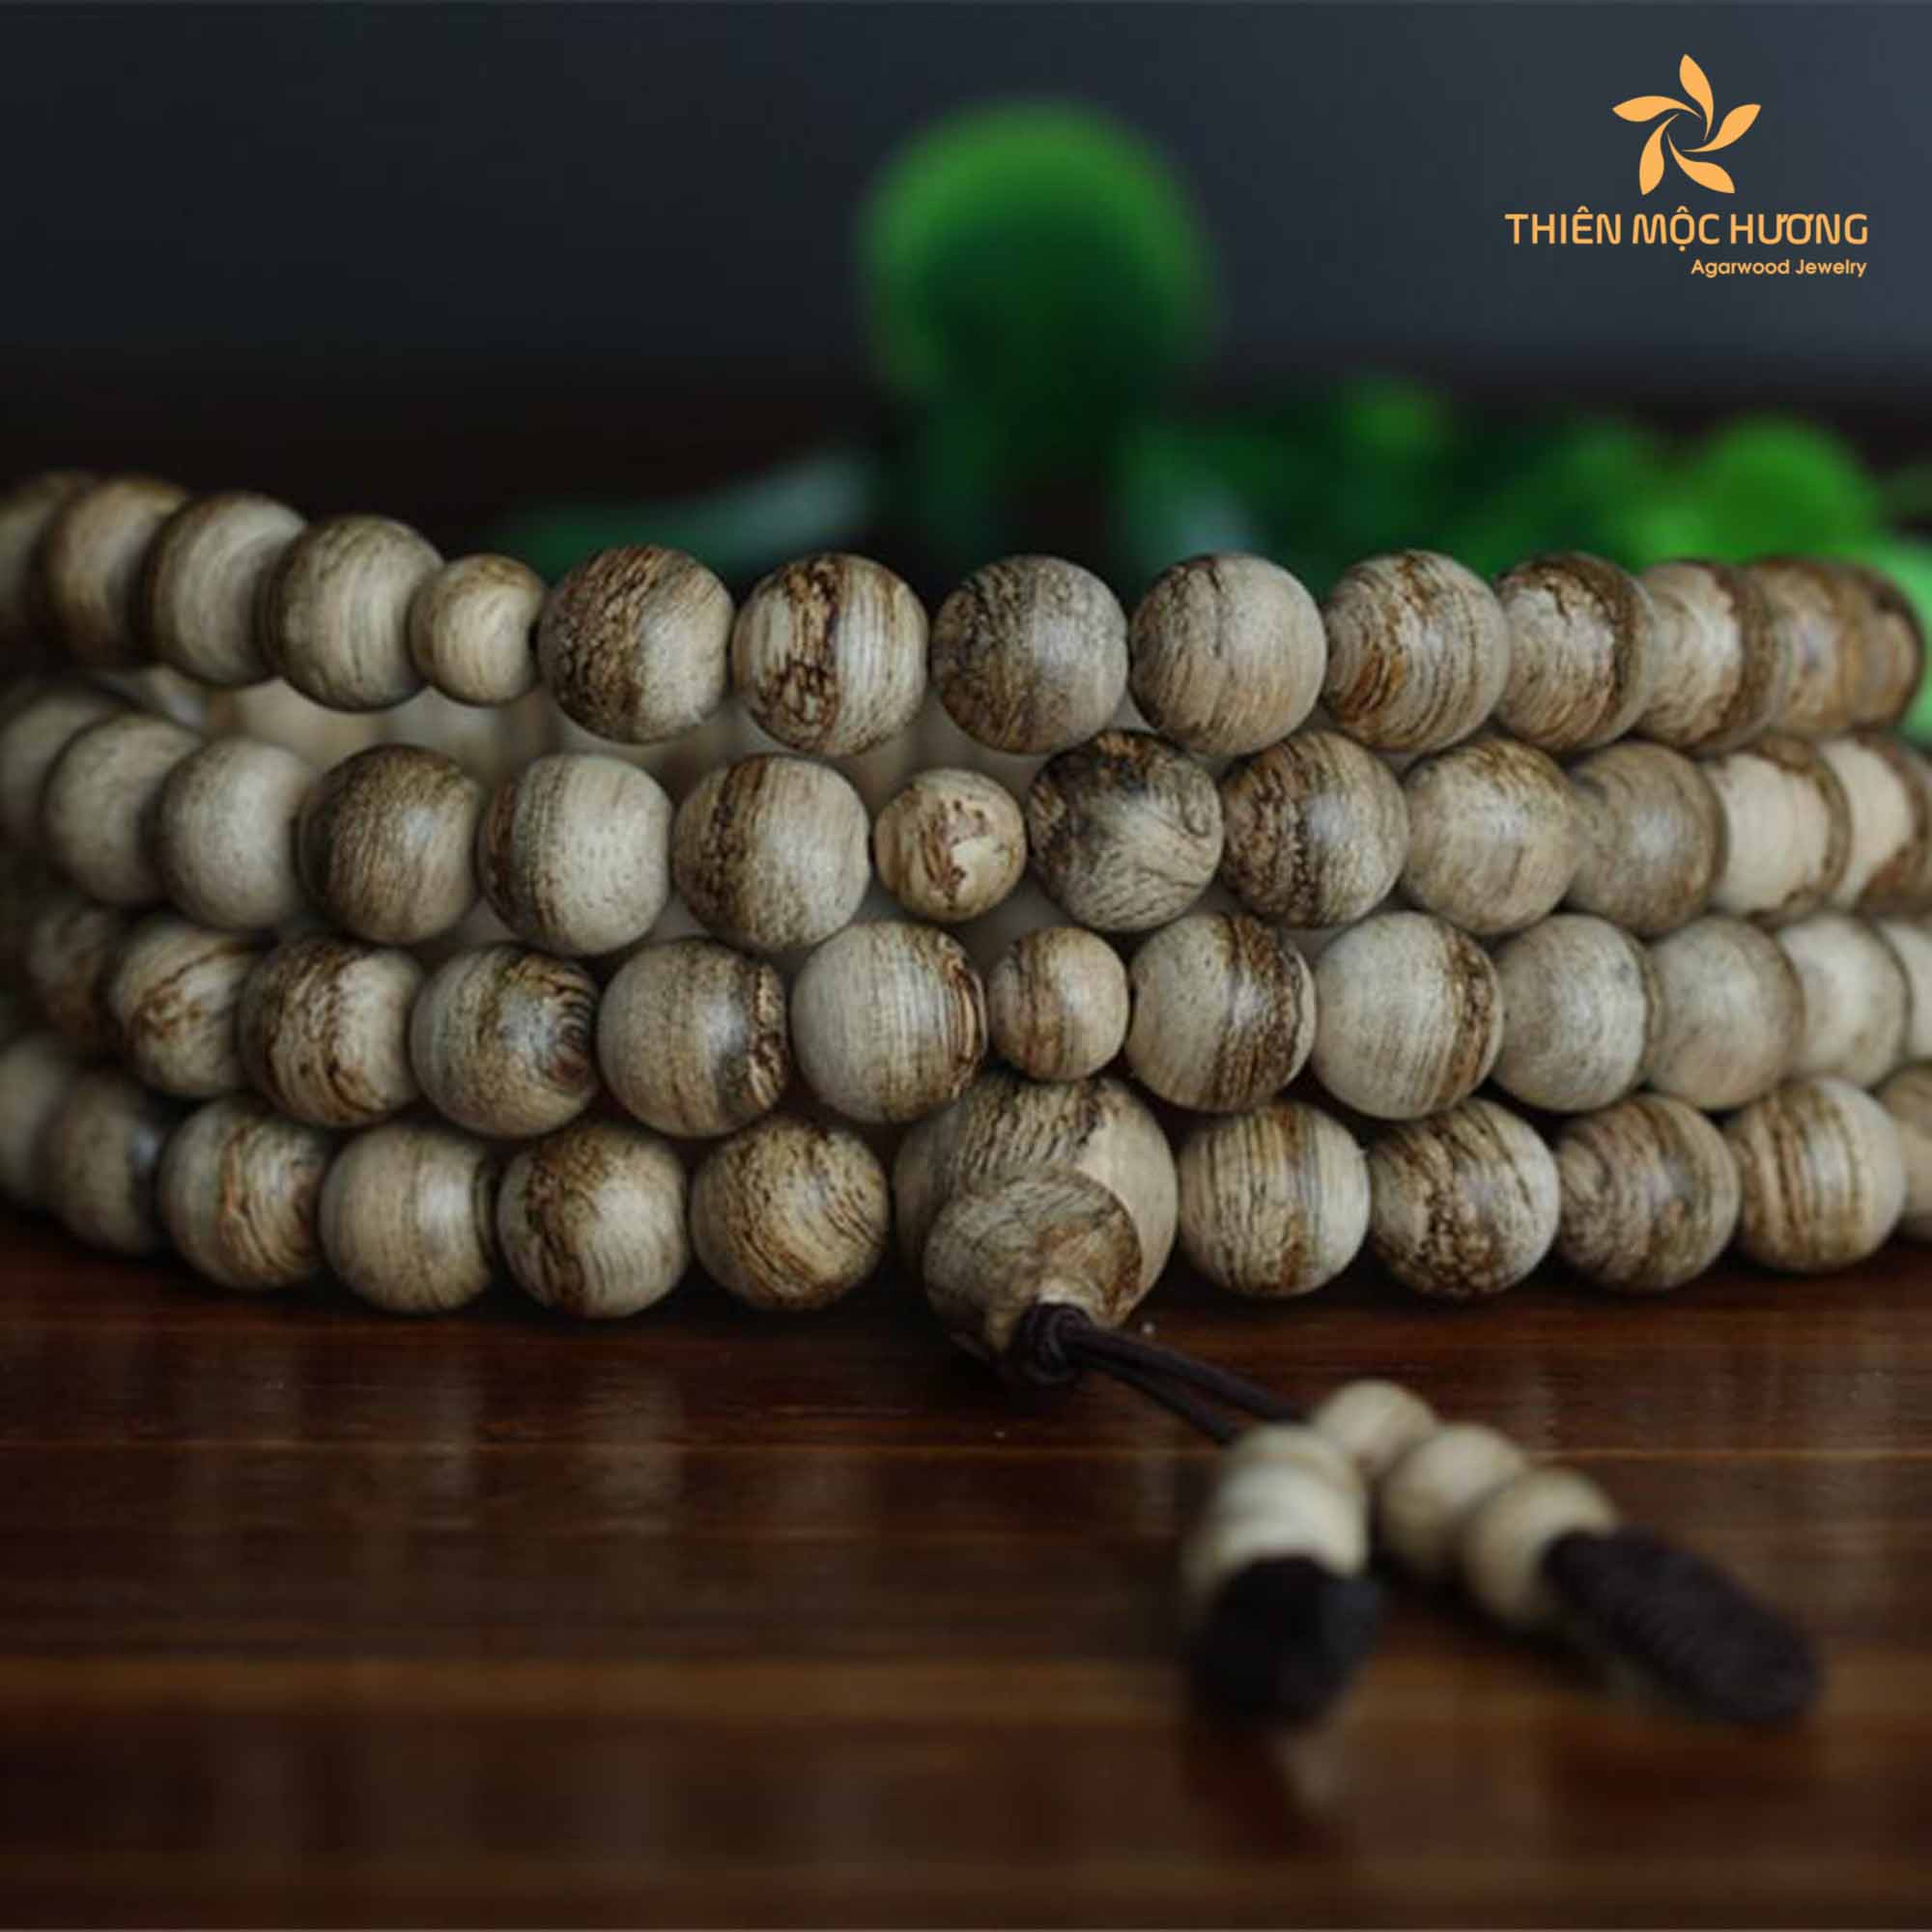 Spiritual and Feng shui significance of Agarwood mala beads necklace